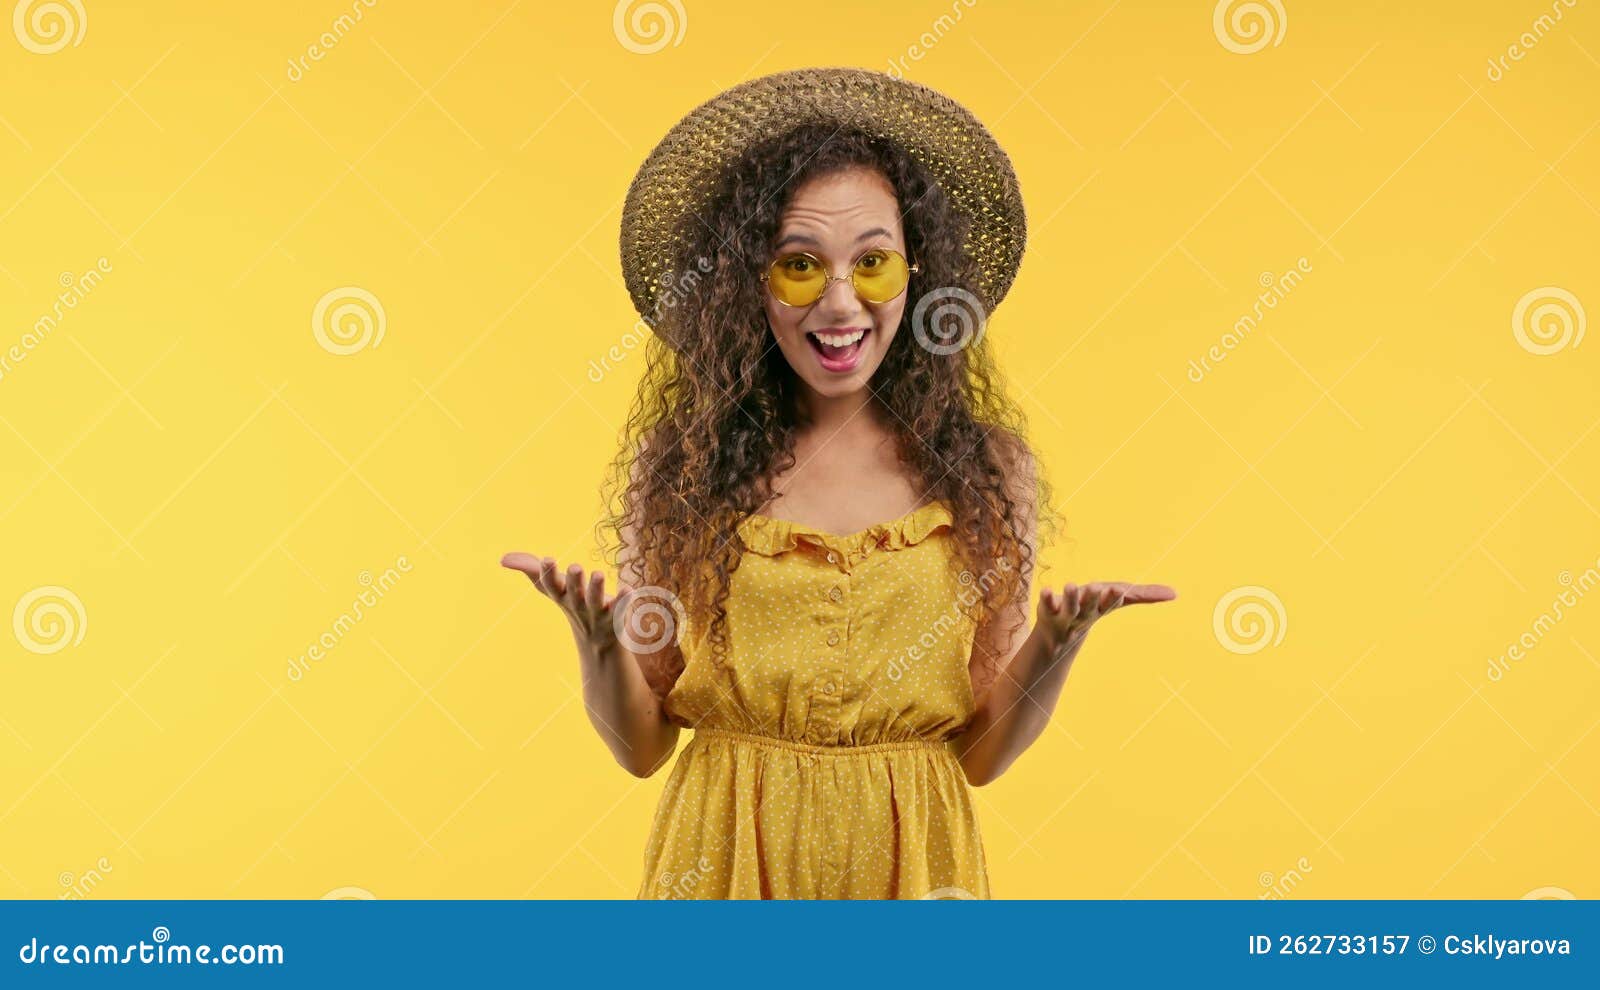 Friendly Girl Showing Yes Signal Nods Head Approve Positive Smiling 